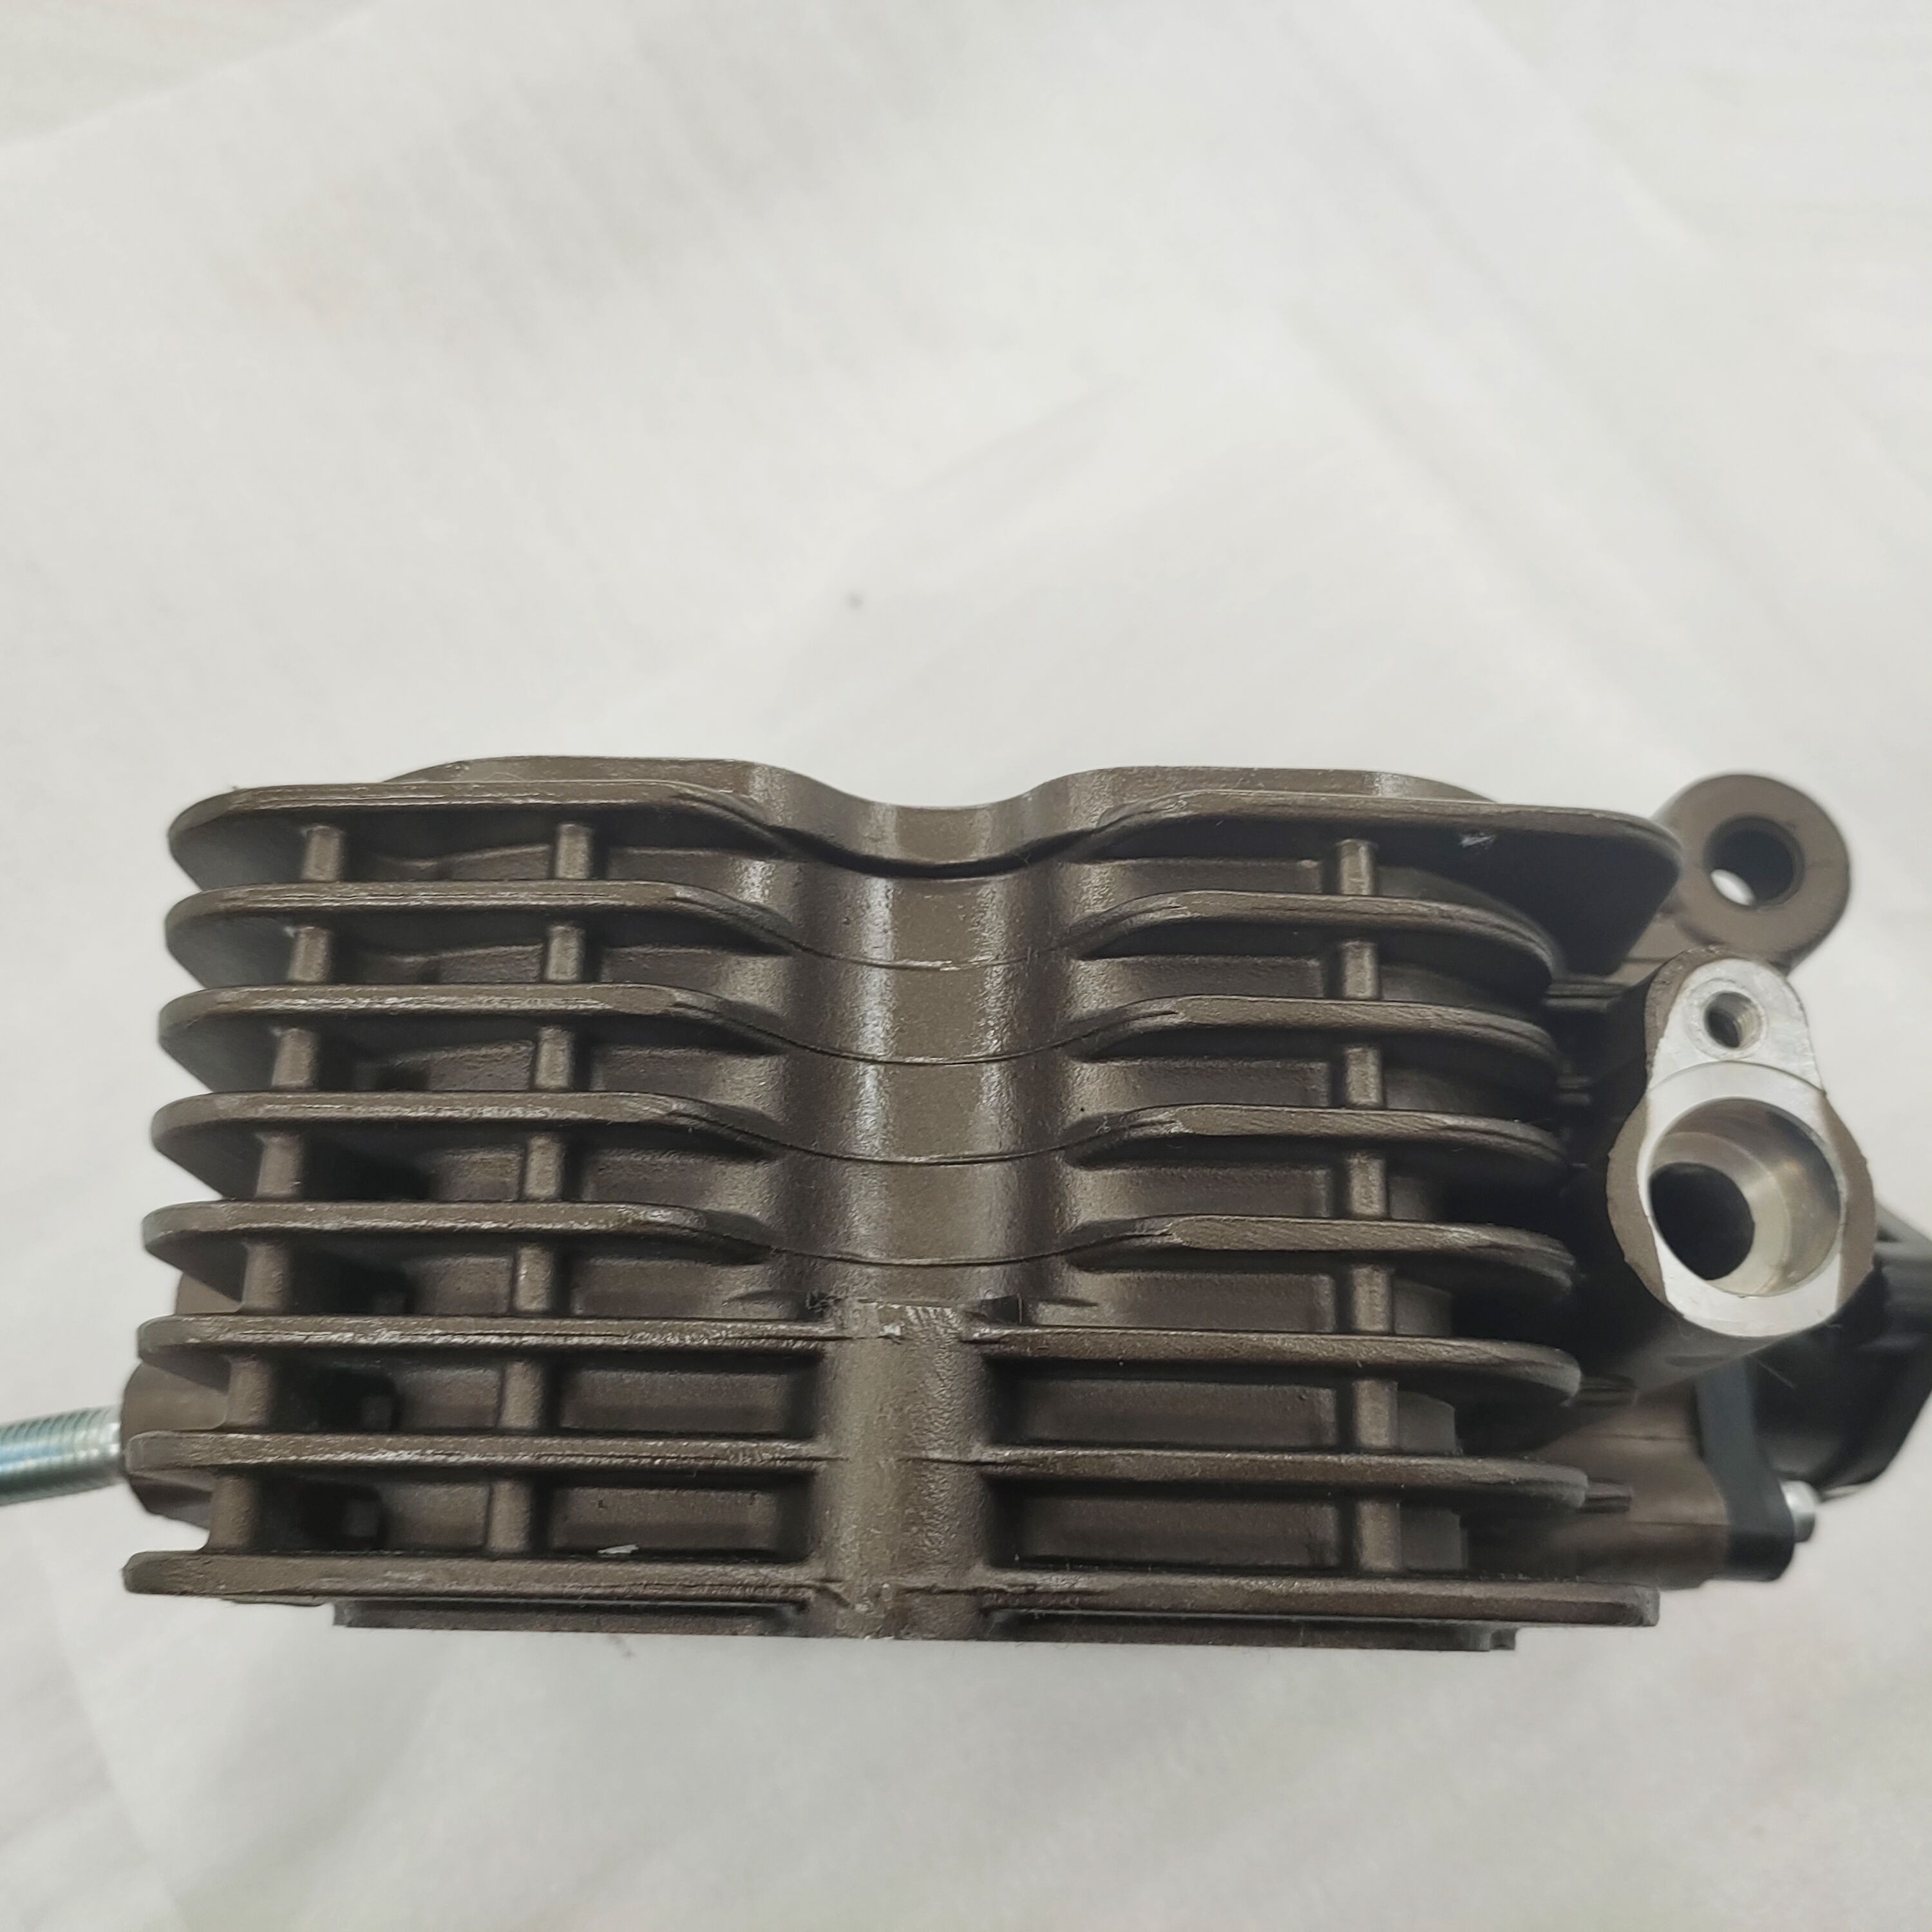 China factory new original motorcycle parts tricycle 250cc water-cooled engine cylinder head high warranty product